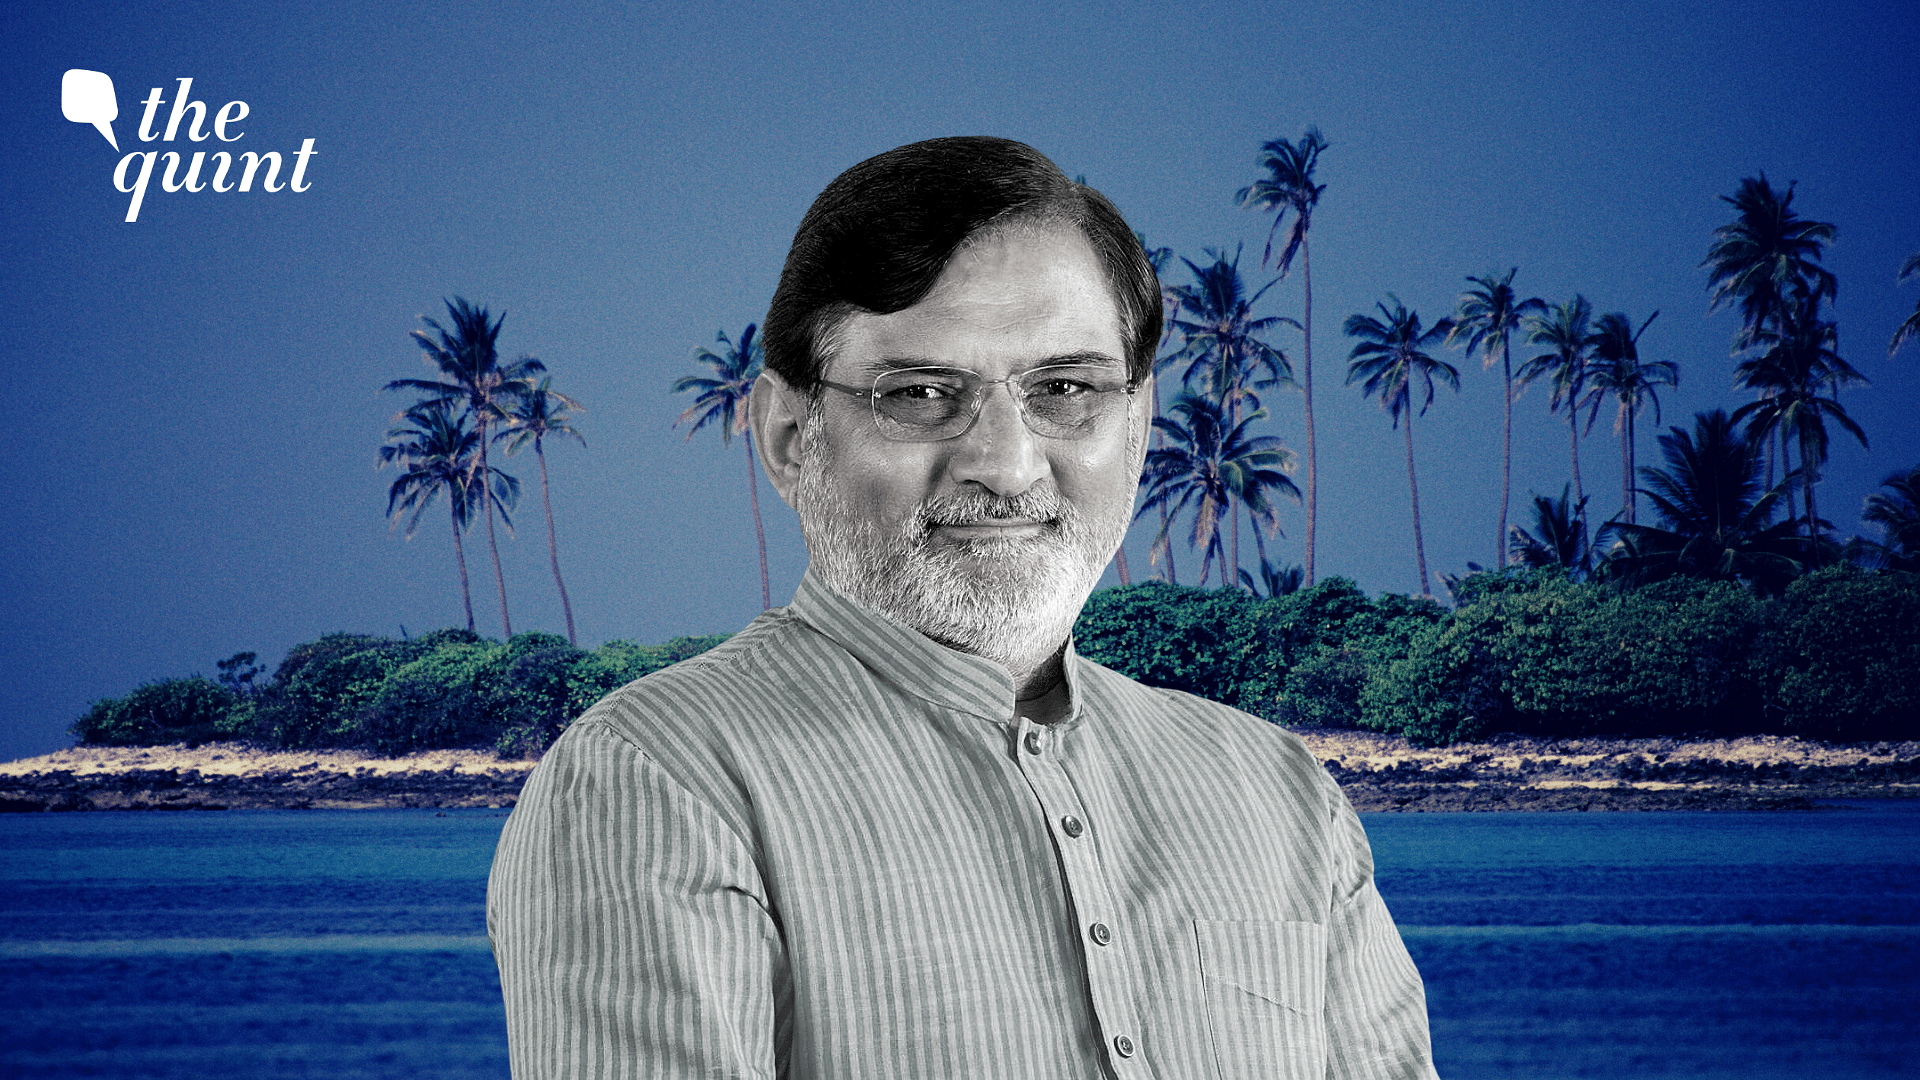 Praful Khoda Patel was appointed as the administrator of Lakshadweep on 5 December 2020.&nbsp;